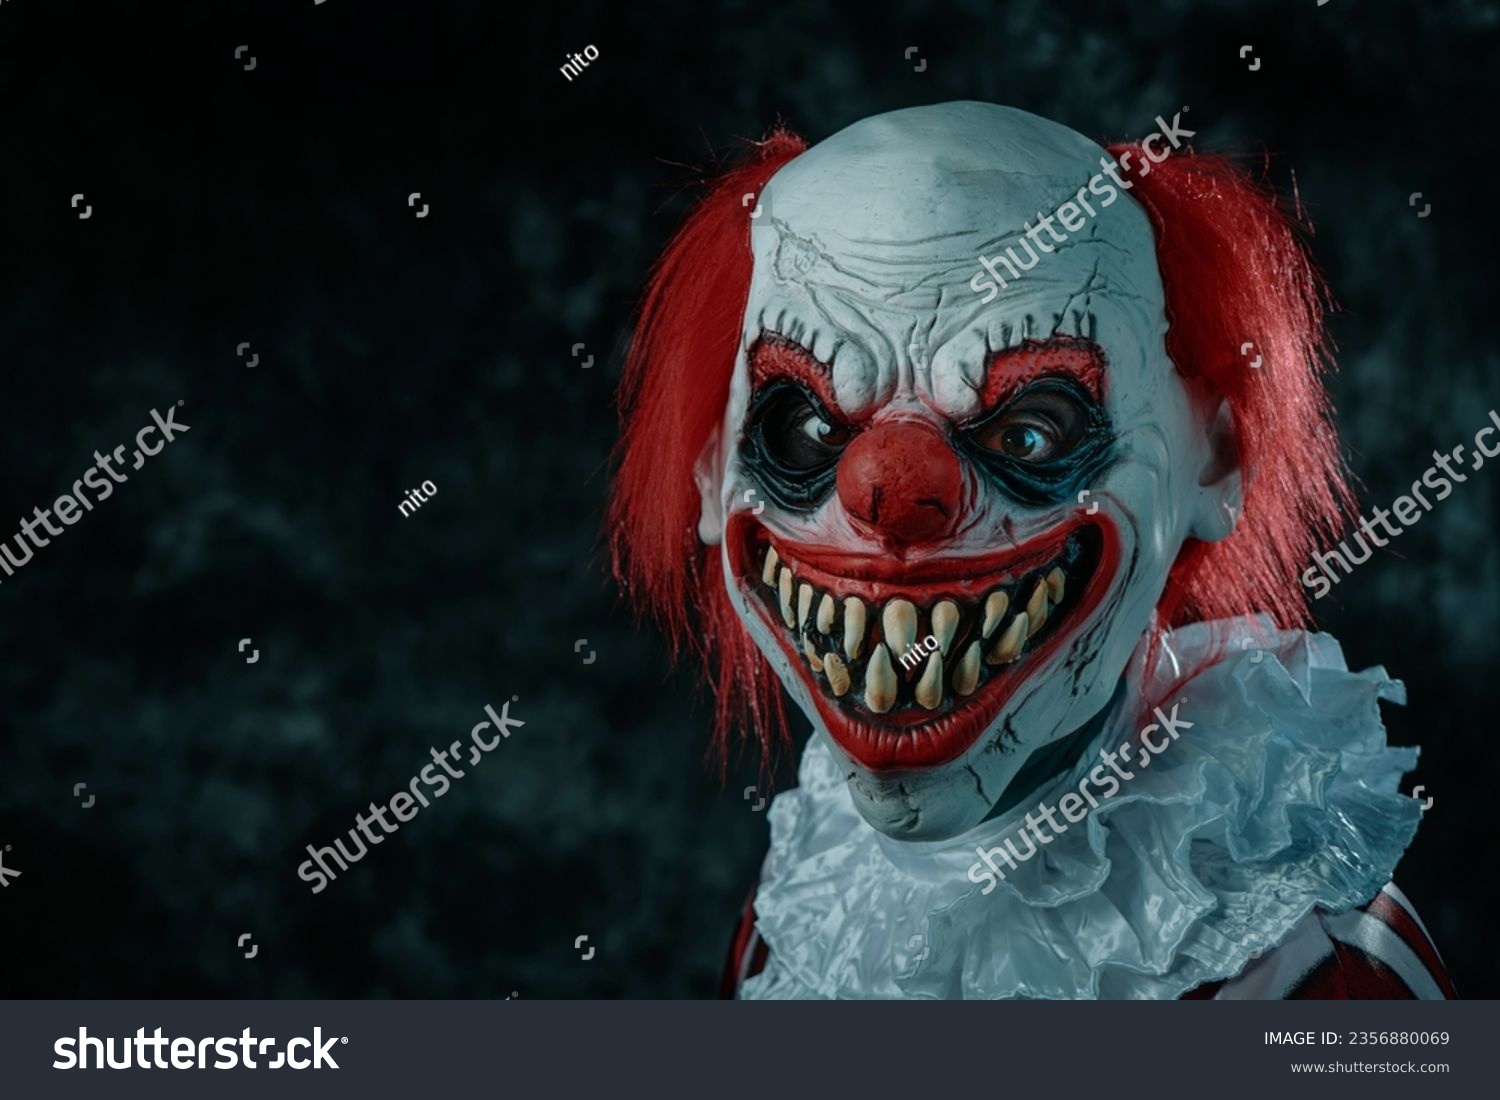 a mad evil redhead clown, wearing a white and red striped costume with a white ruff, stares at the observer with a creepy smile, in front of a dark background #2356880069